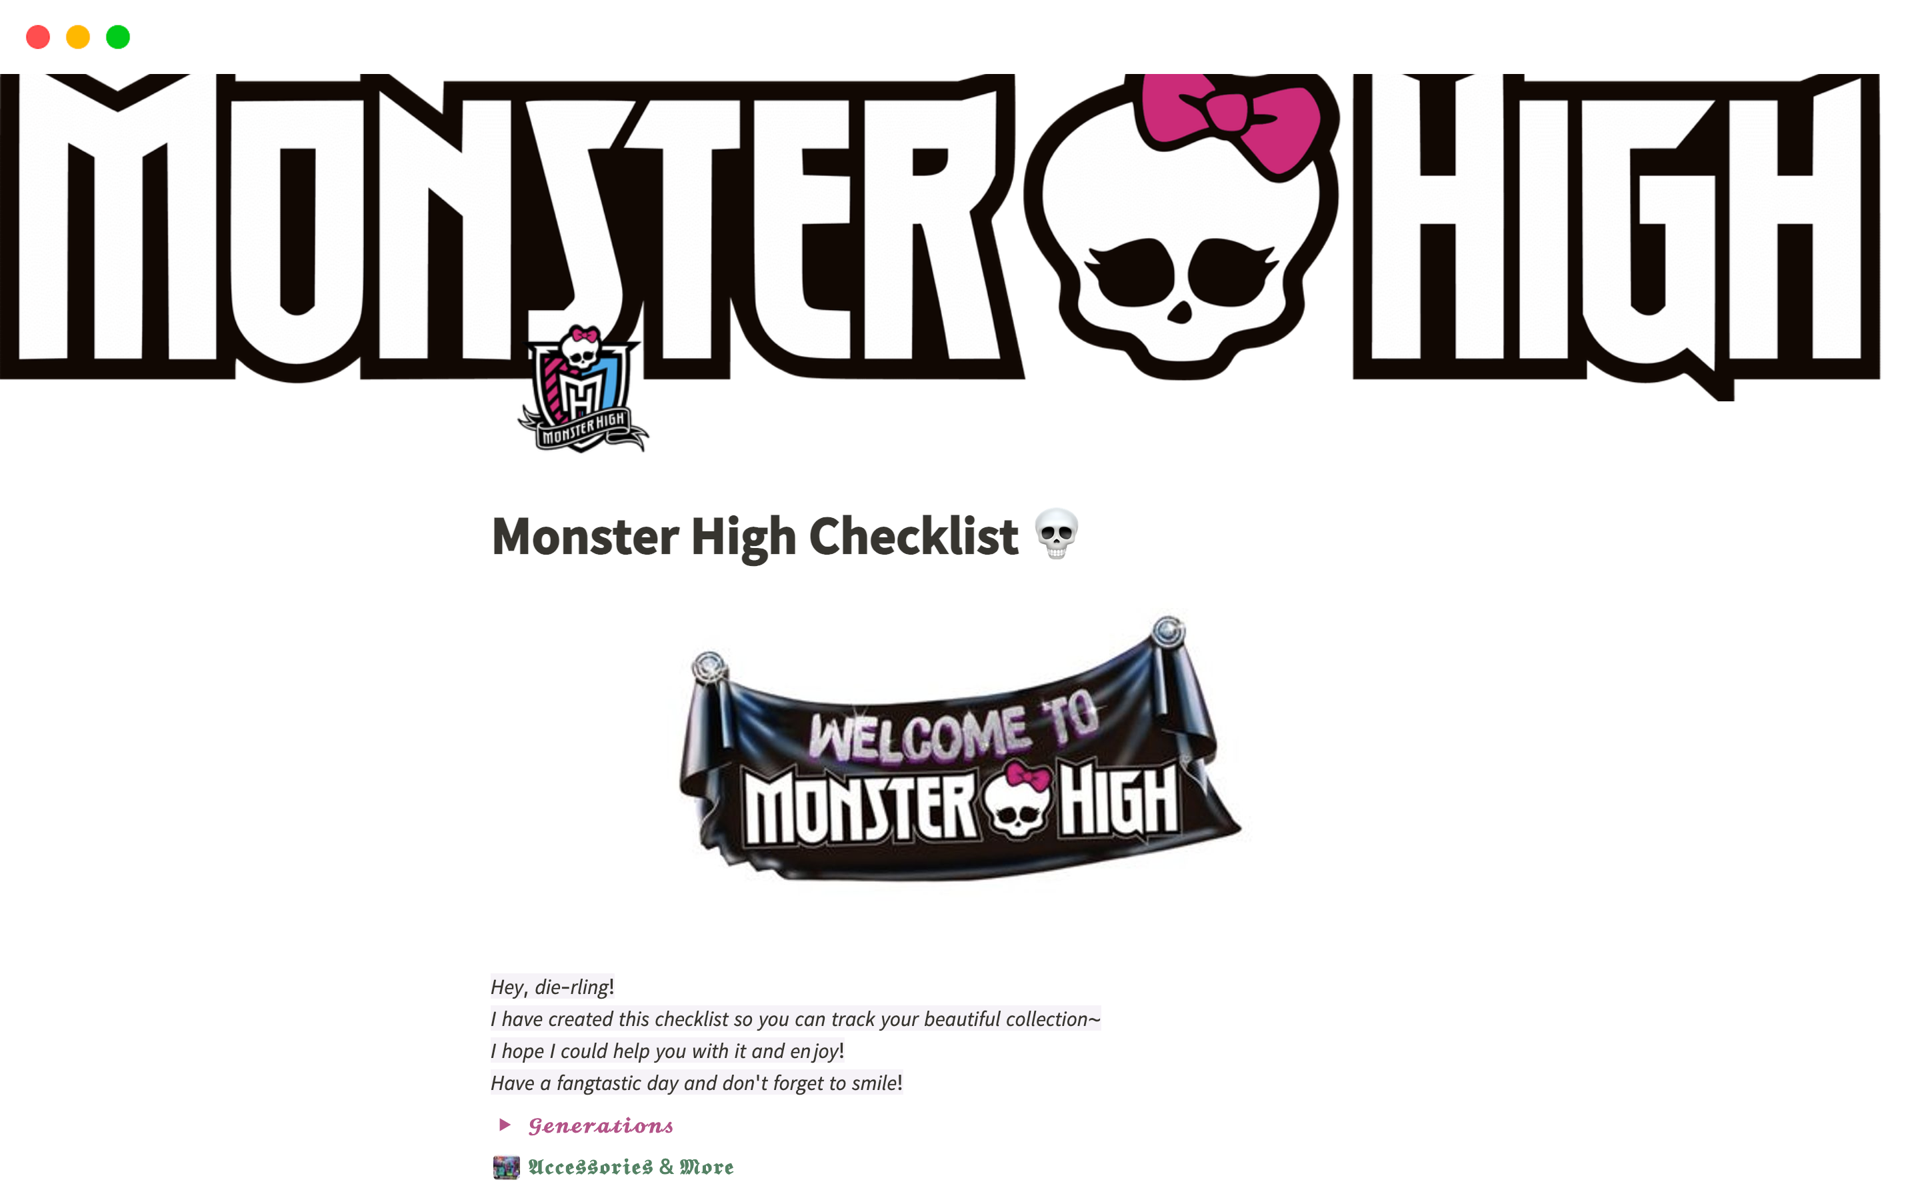 Monster high collectors can now track their doll collections through different generations and accessories all at once! 